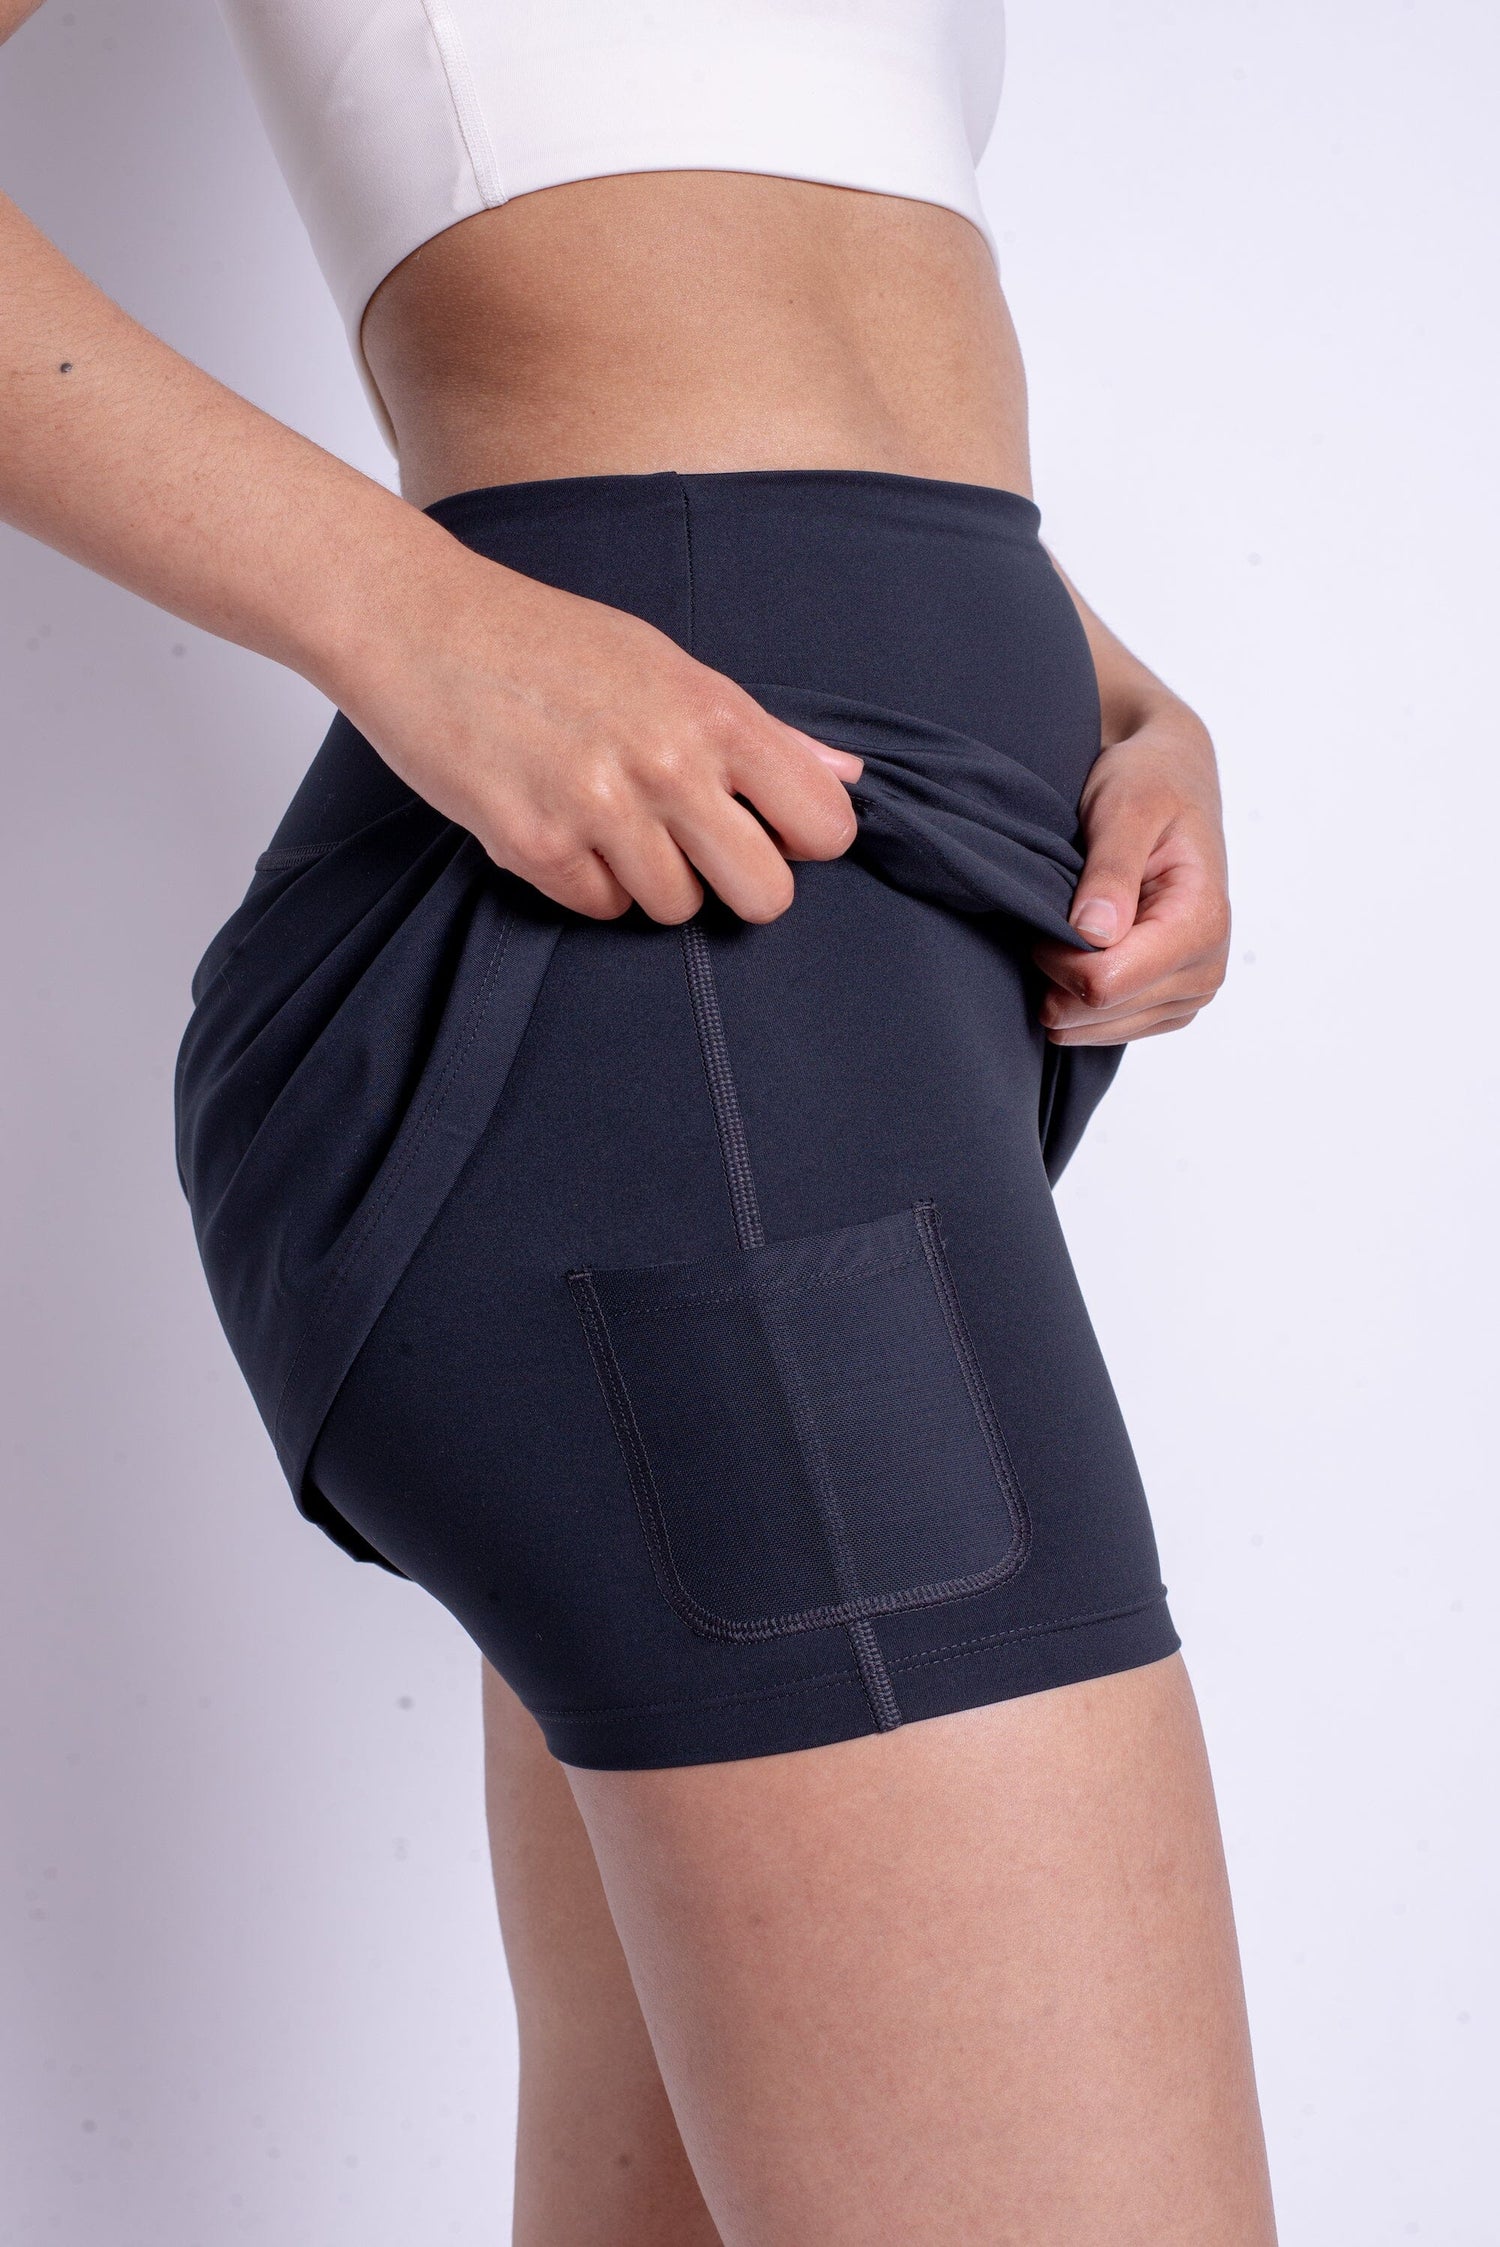 Girlfriend Collective The Skort High-Rise - Made from Recycled Plastic Bottles Ivory Skirt